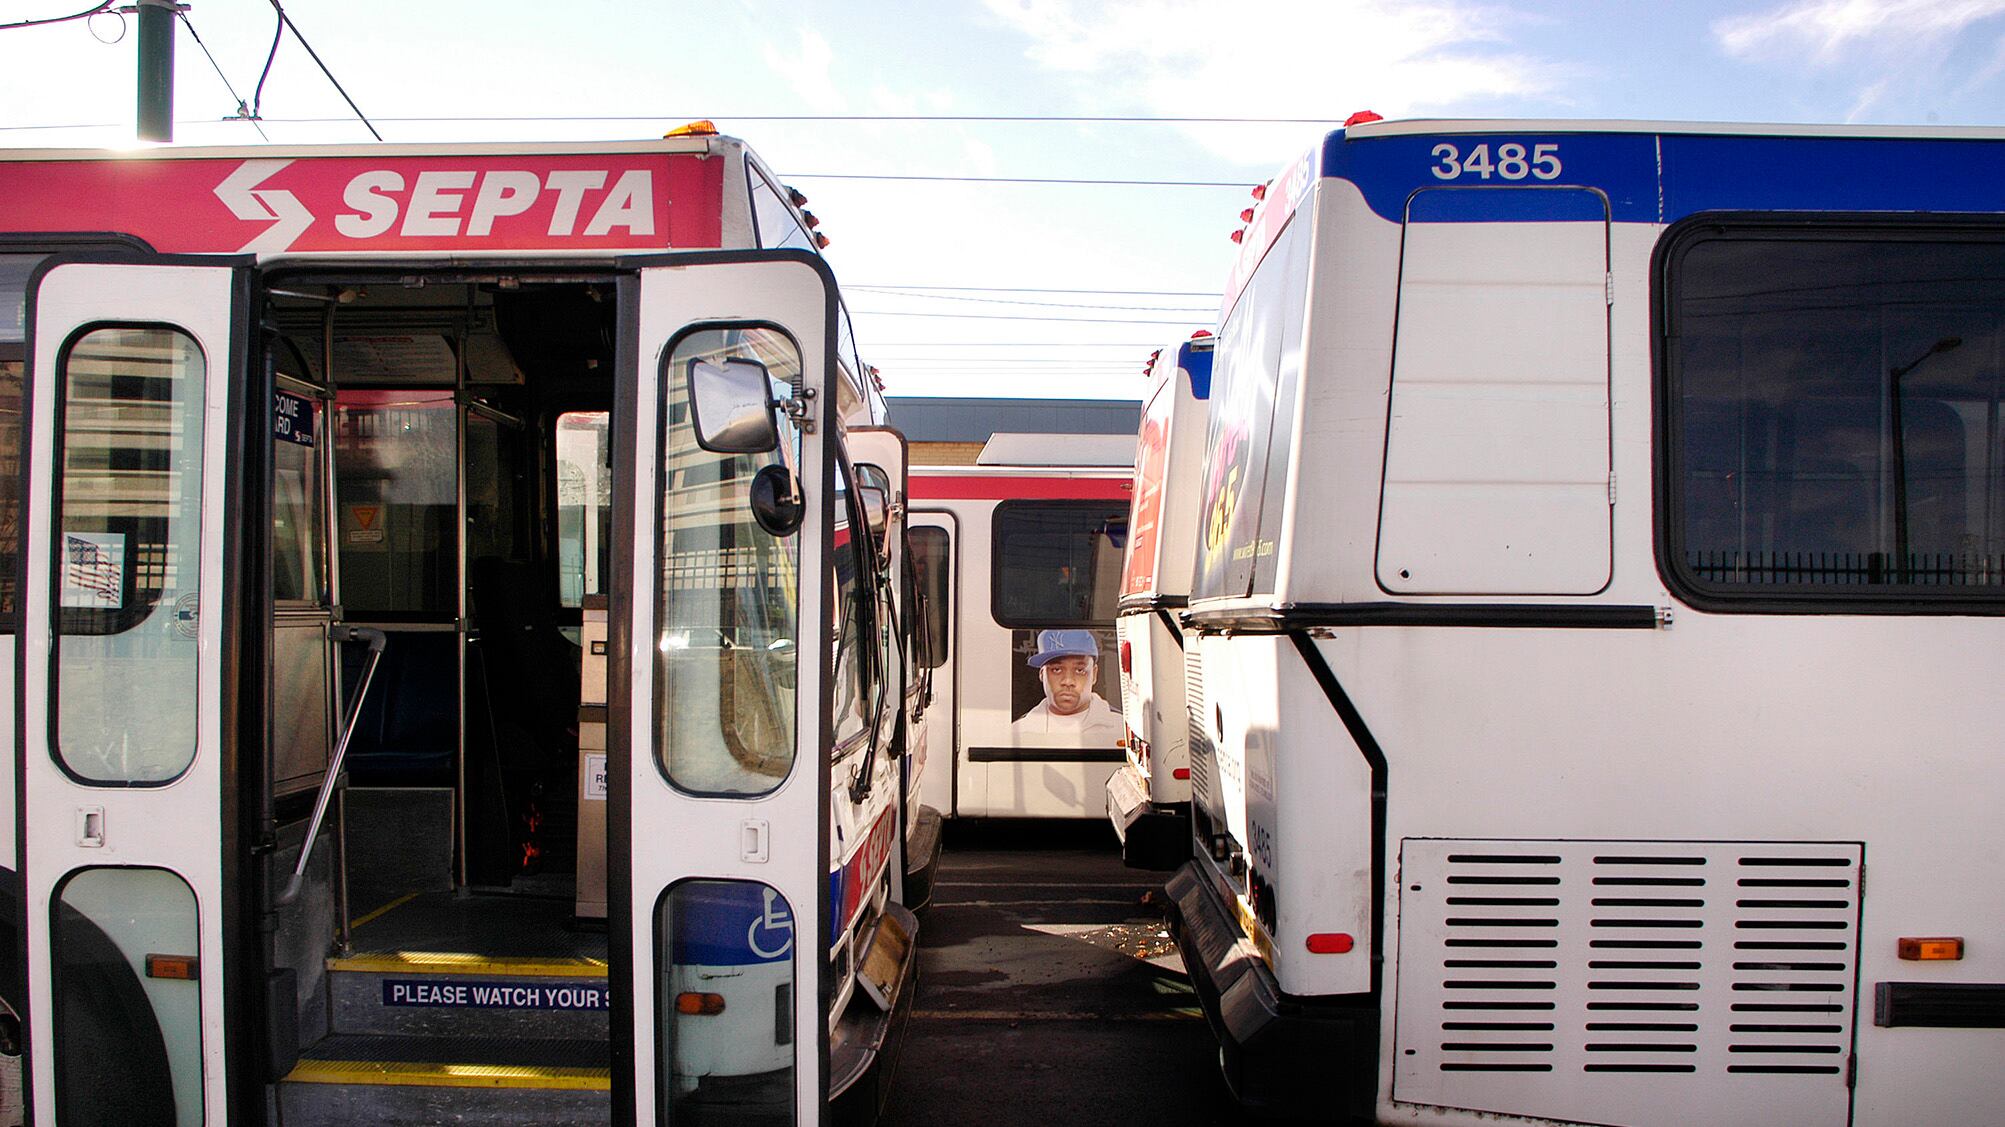 Several SEPTA buses line up with doors open